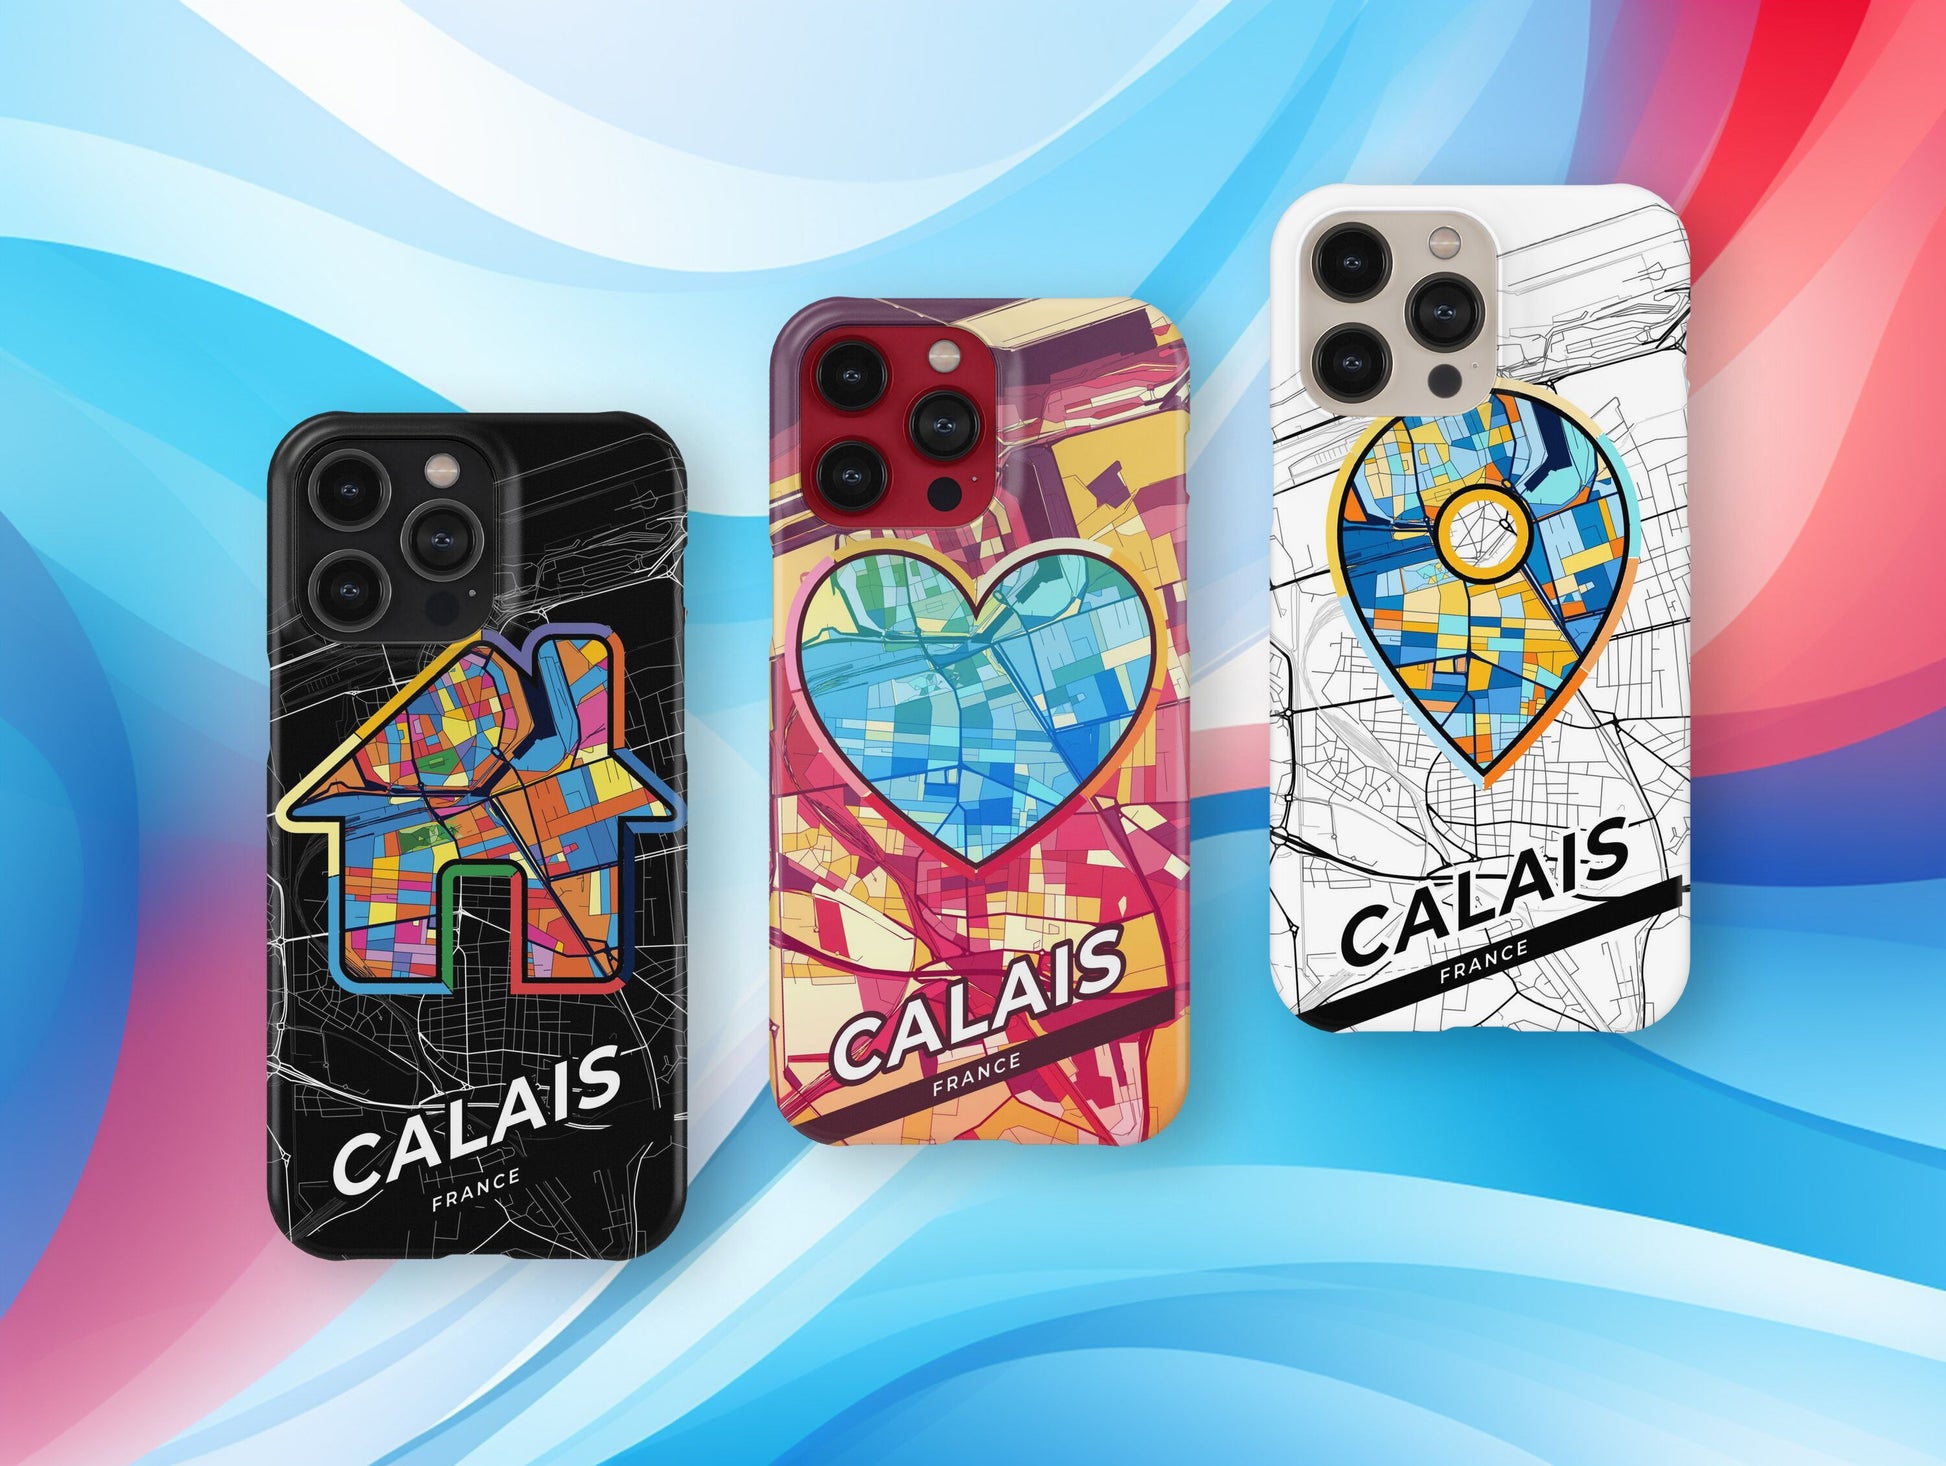 Calais France slim phone case with colorful icon. Birthday, wedding or housewarming gift. Couple match cases.